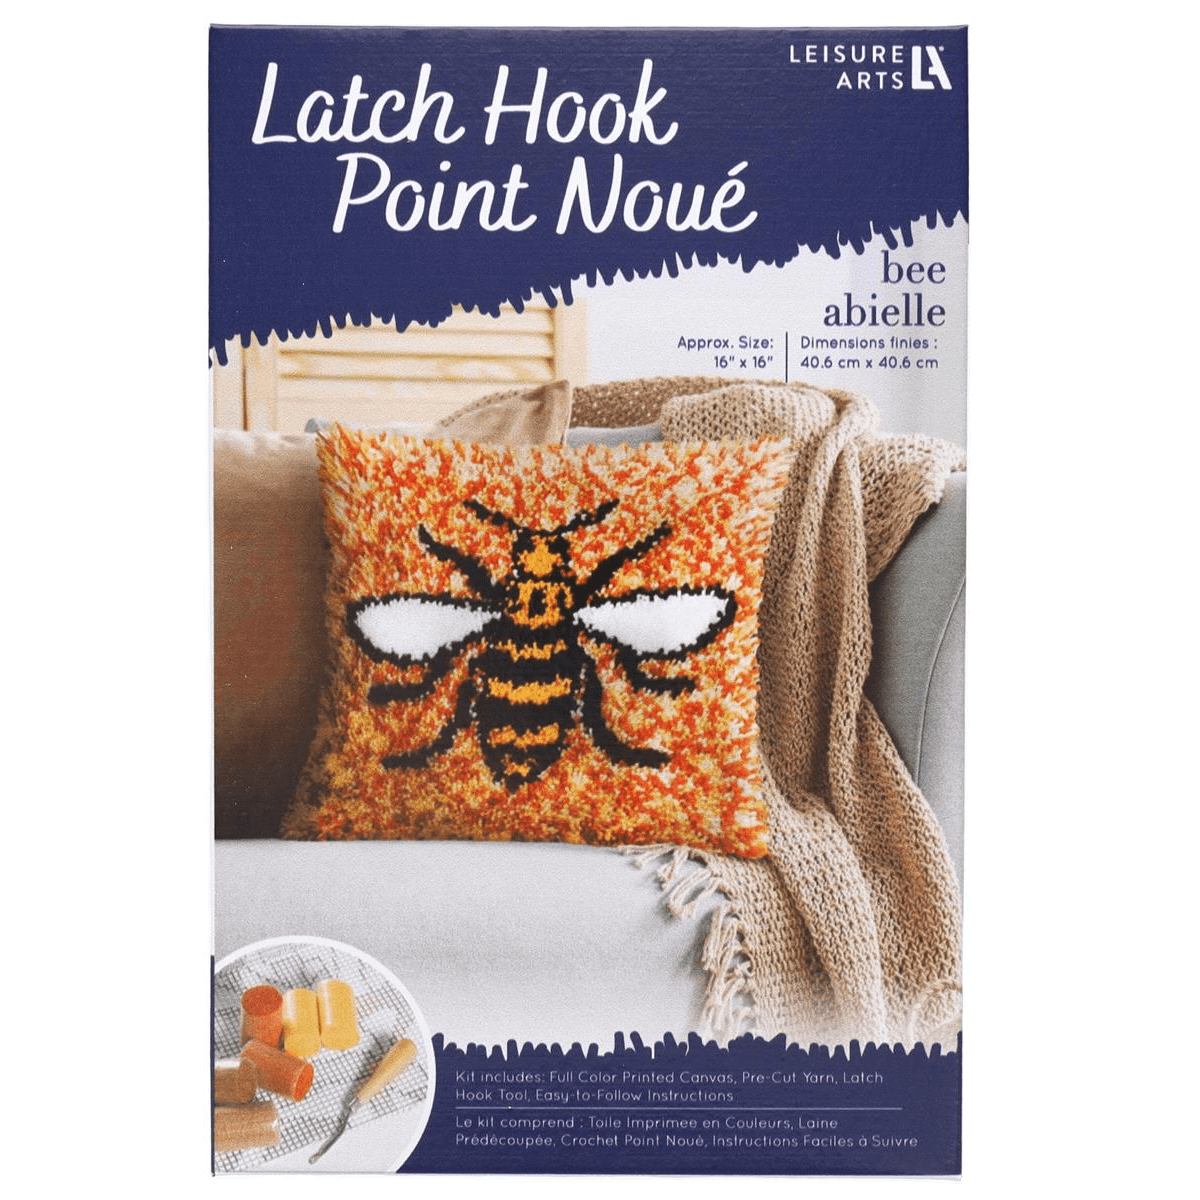 Latch hook 101: Do it without the kit!